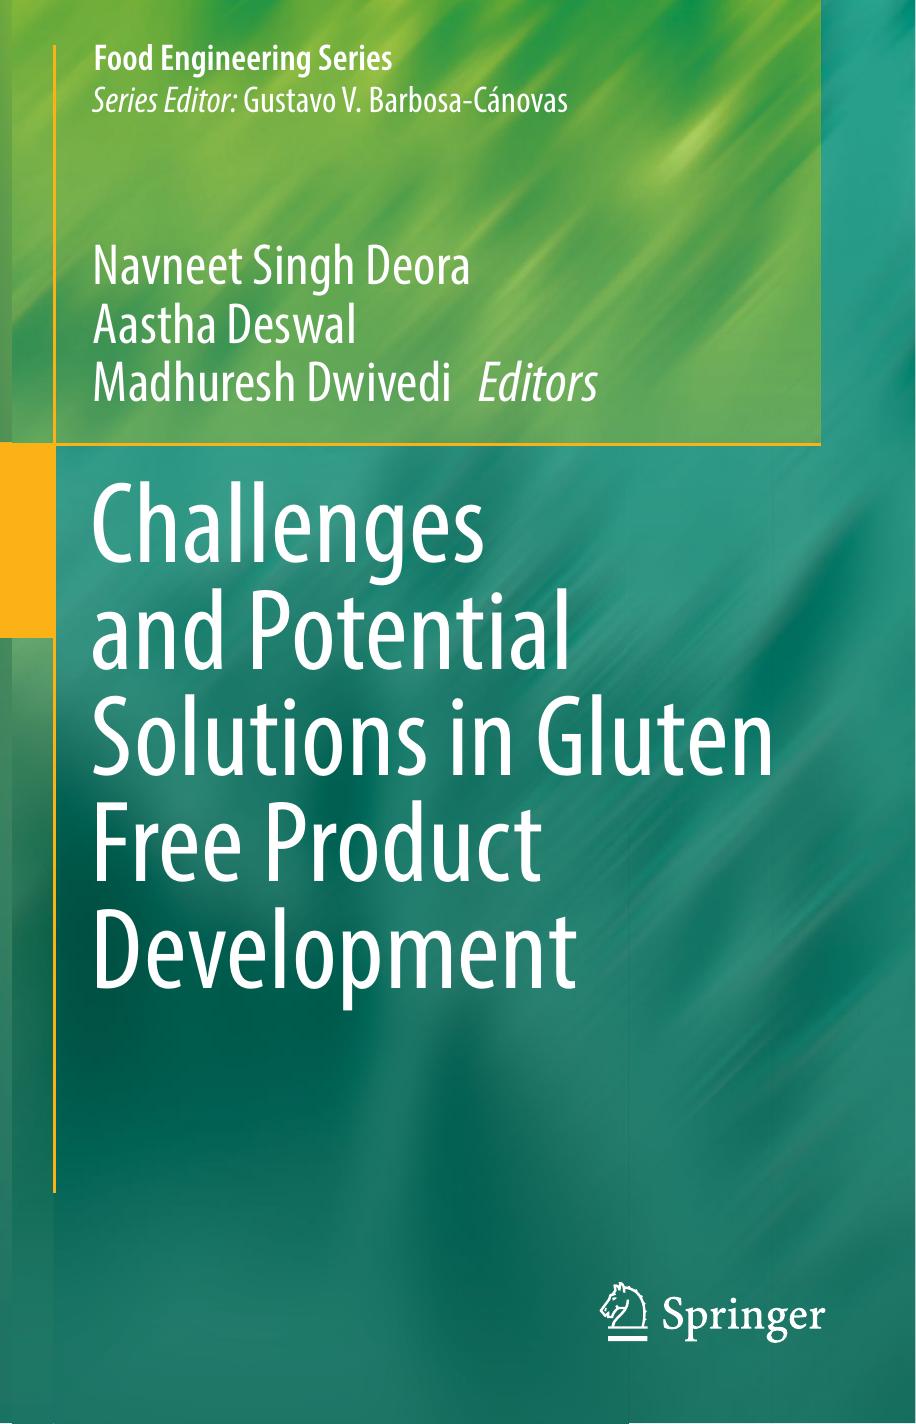 Challenges and Potential Solutions in Gluten Free Product Development-Springer (2021)